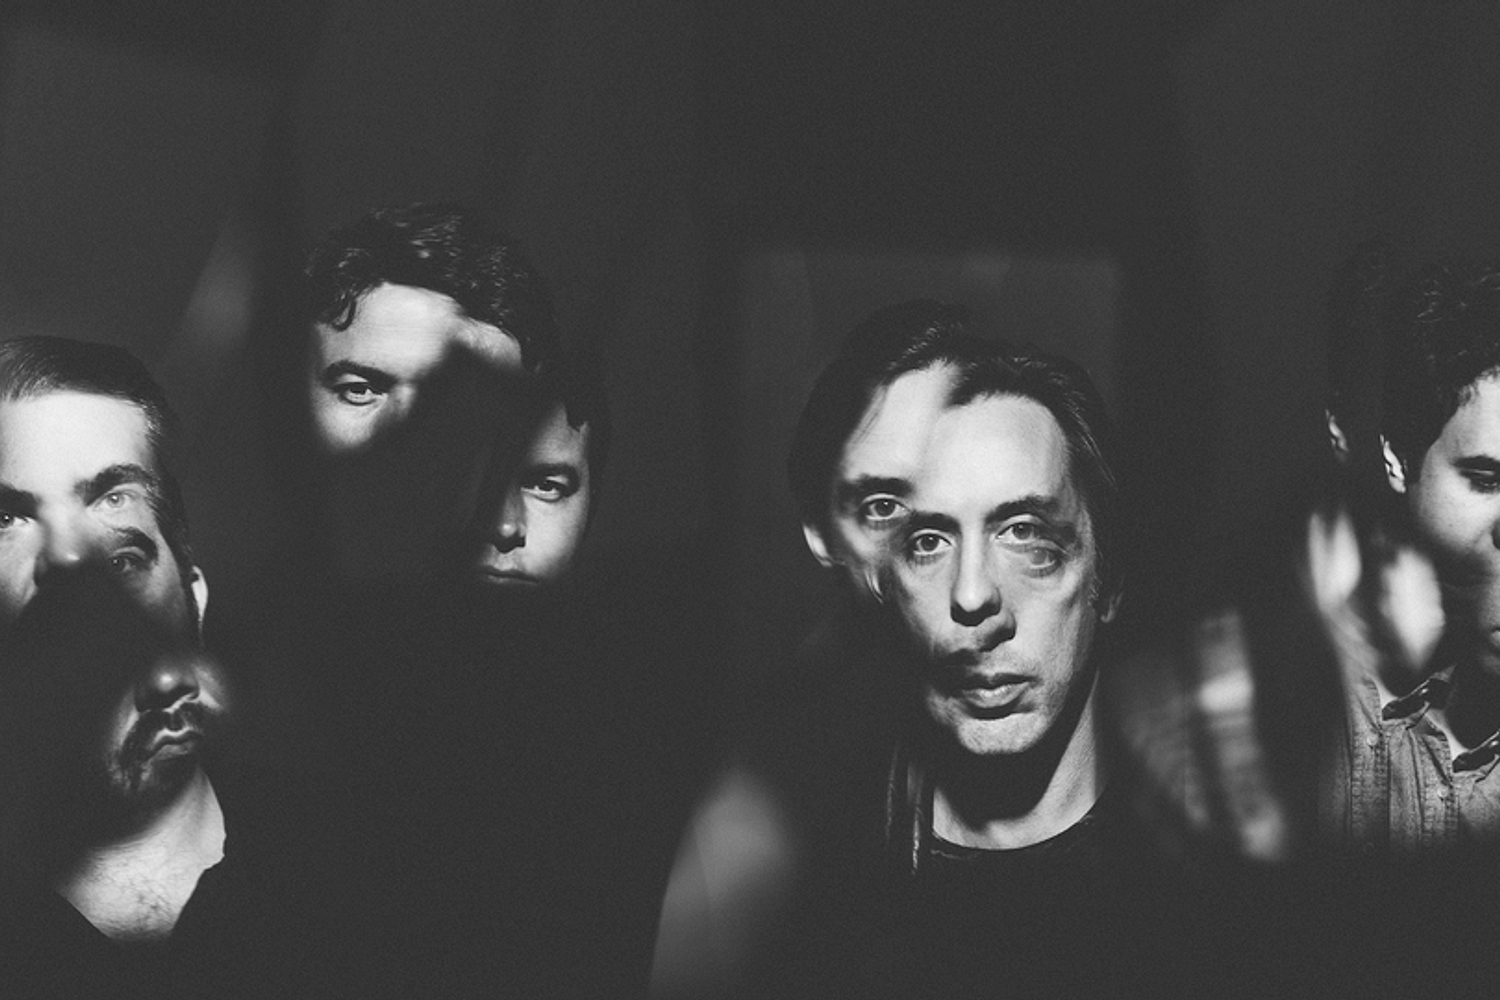 Wolf Parade have announced new album ‘Cry Cry Cry’